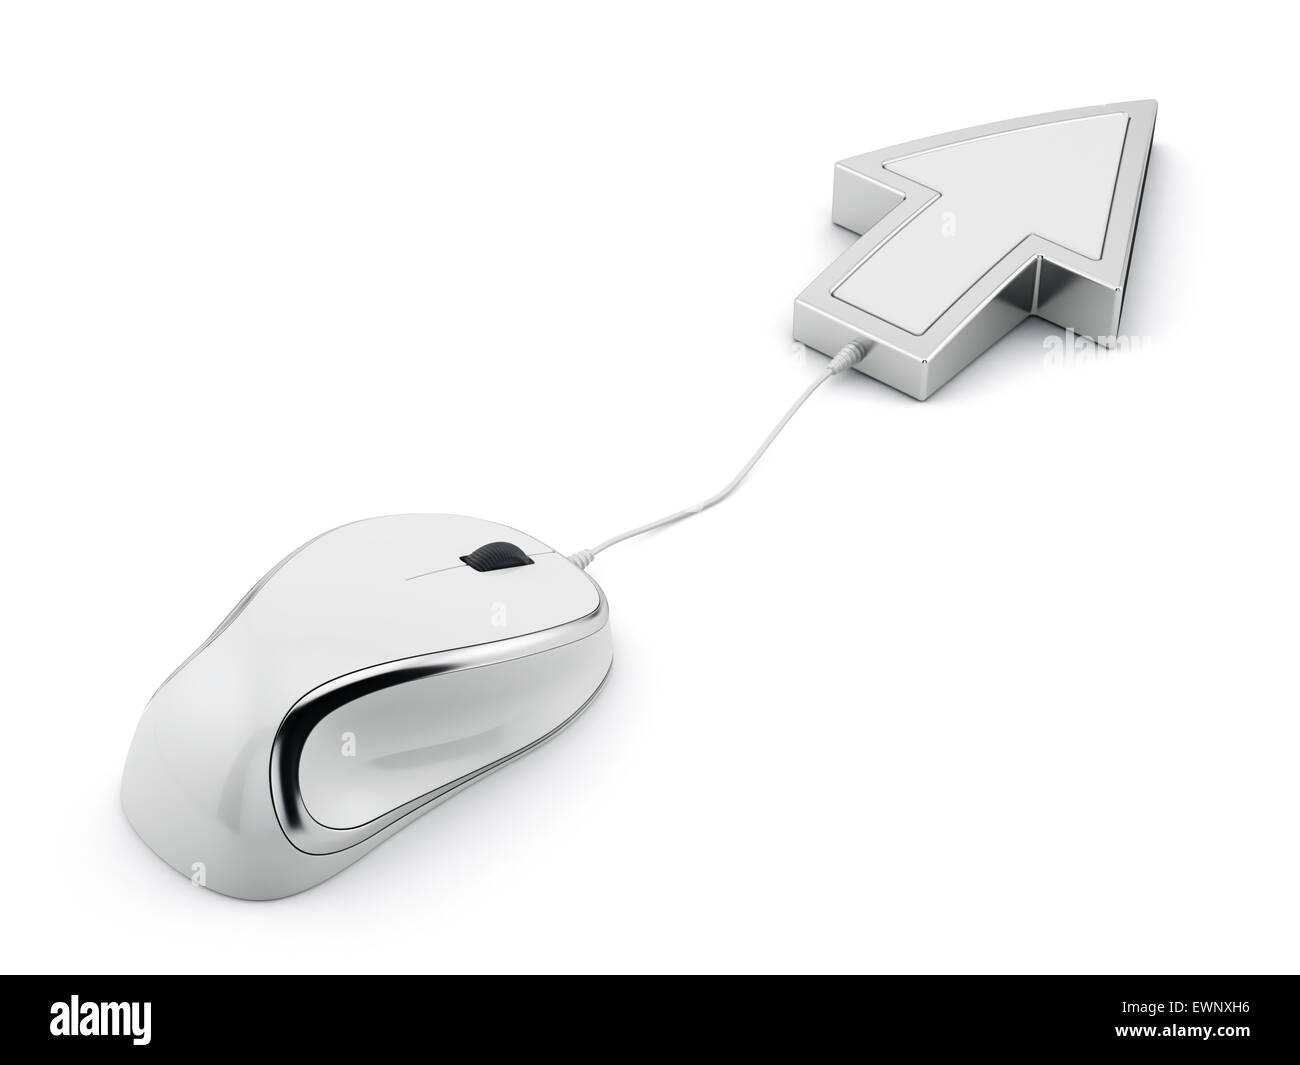 Computer mouse with arrow cursor. 3d illustration isolated on background white background Stock Photo